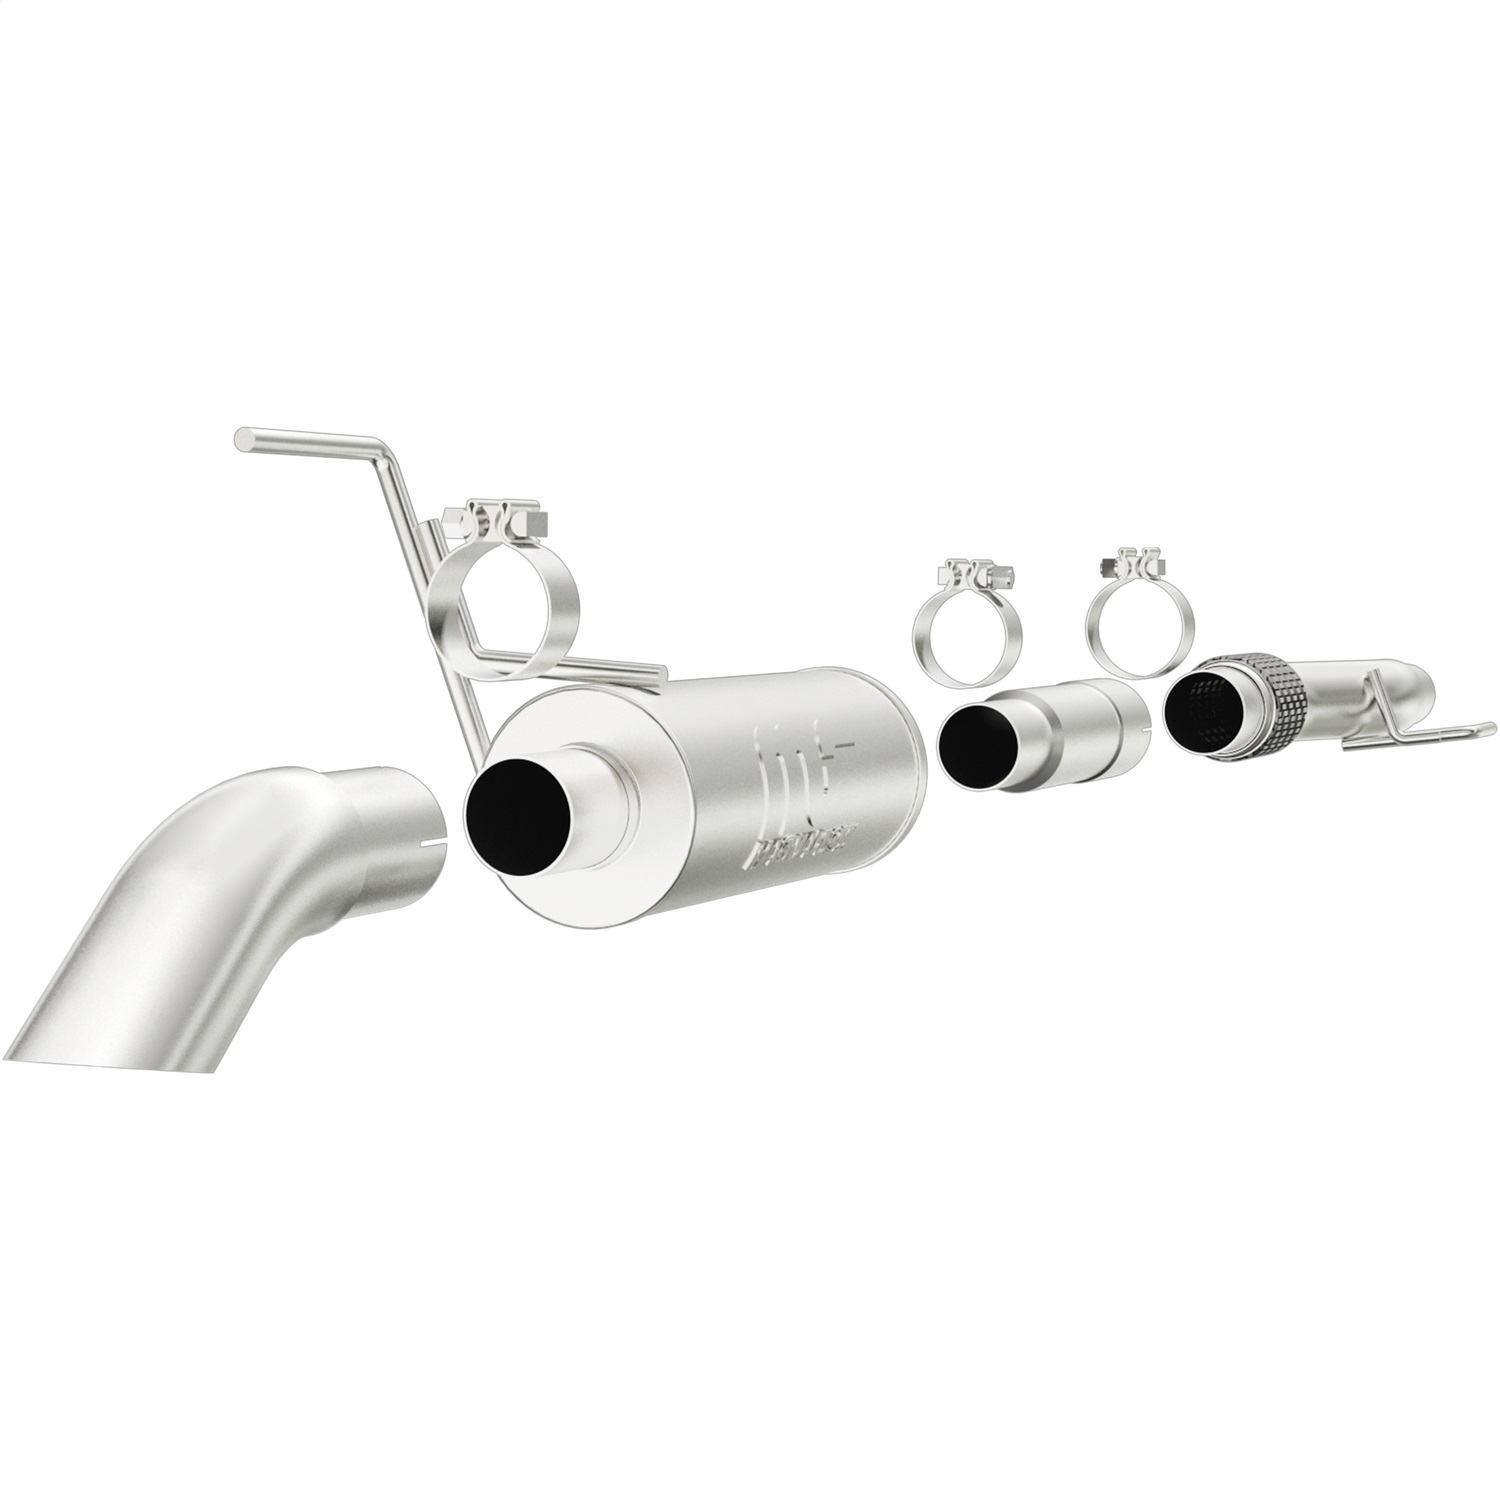 Magnaflow Performance Exhaust Magnaflow Performance Exhaust 17149 Off Road Pro Series Cat-Back System